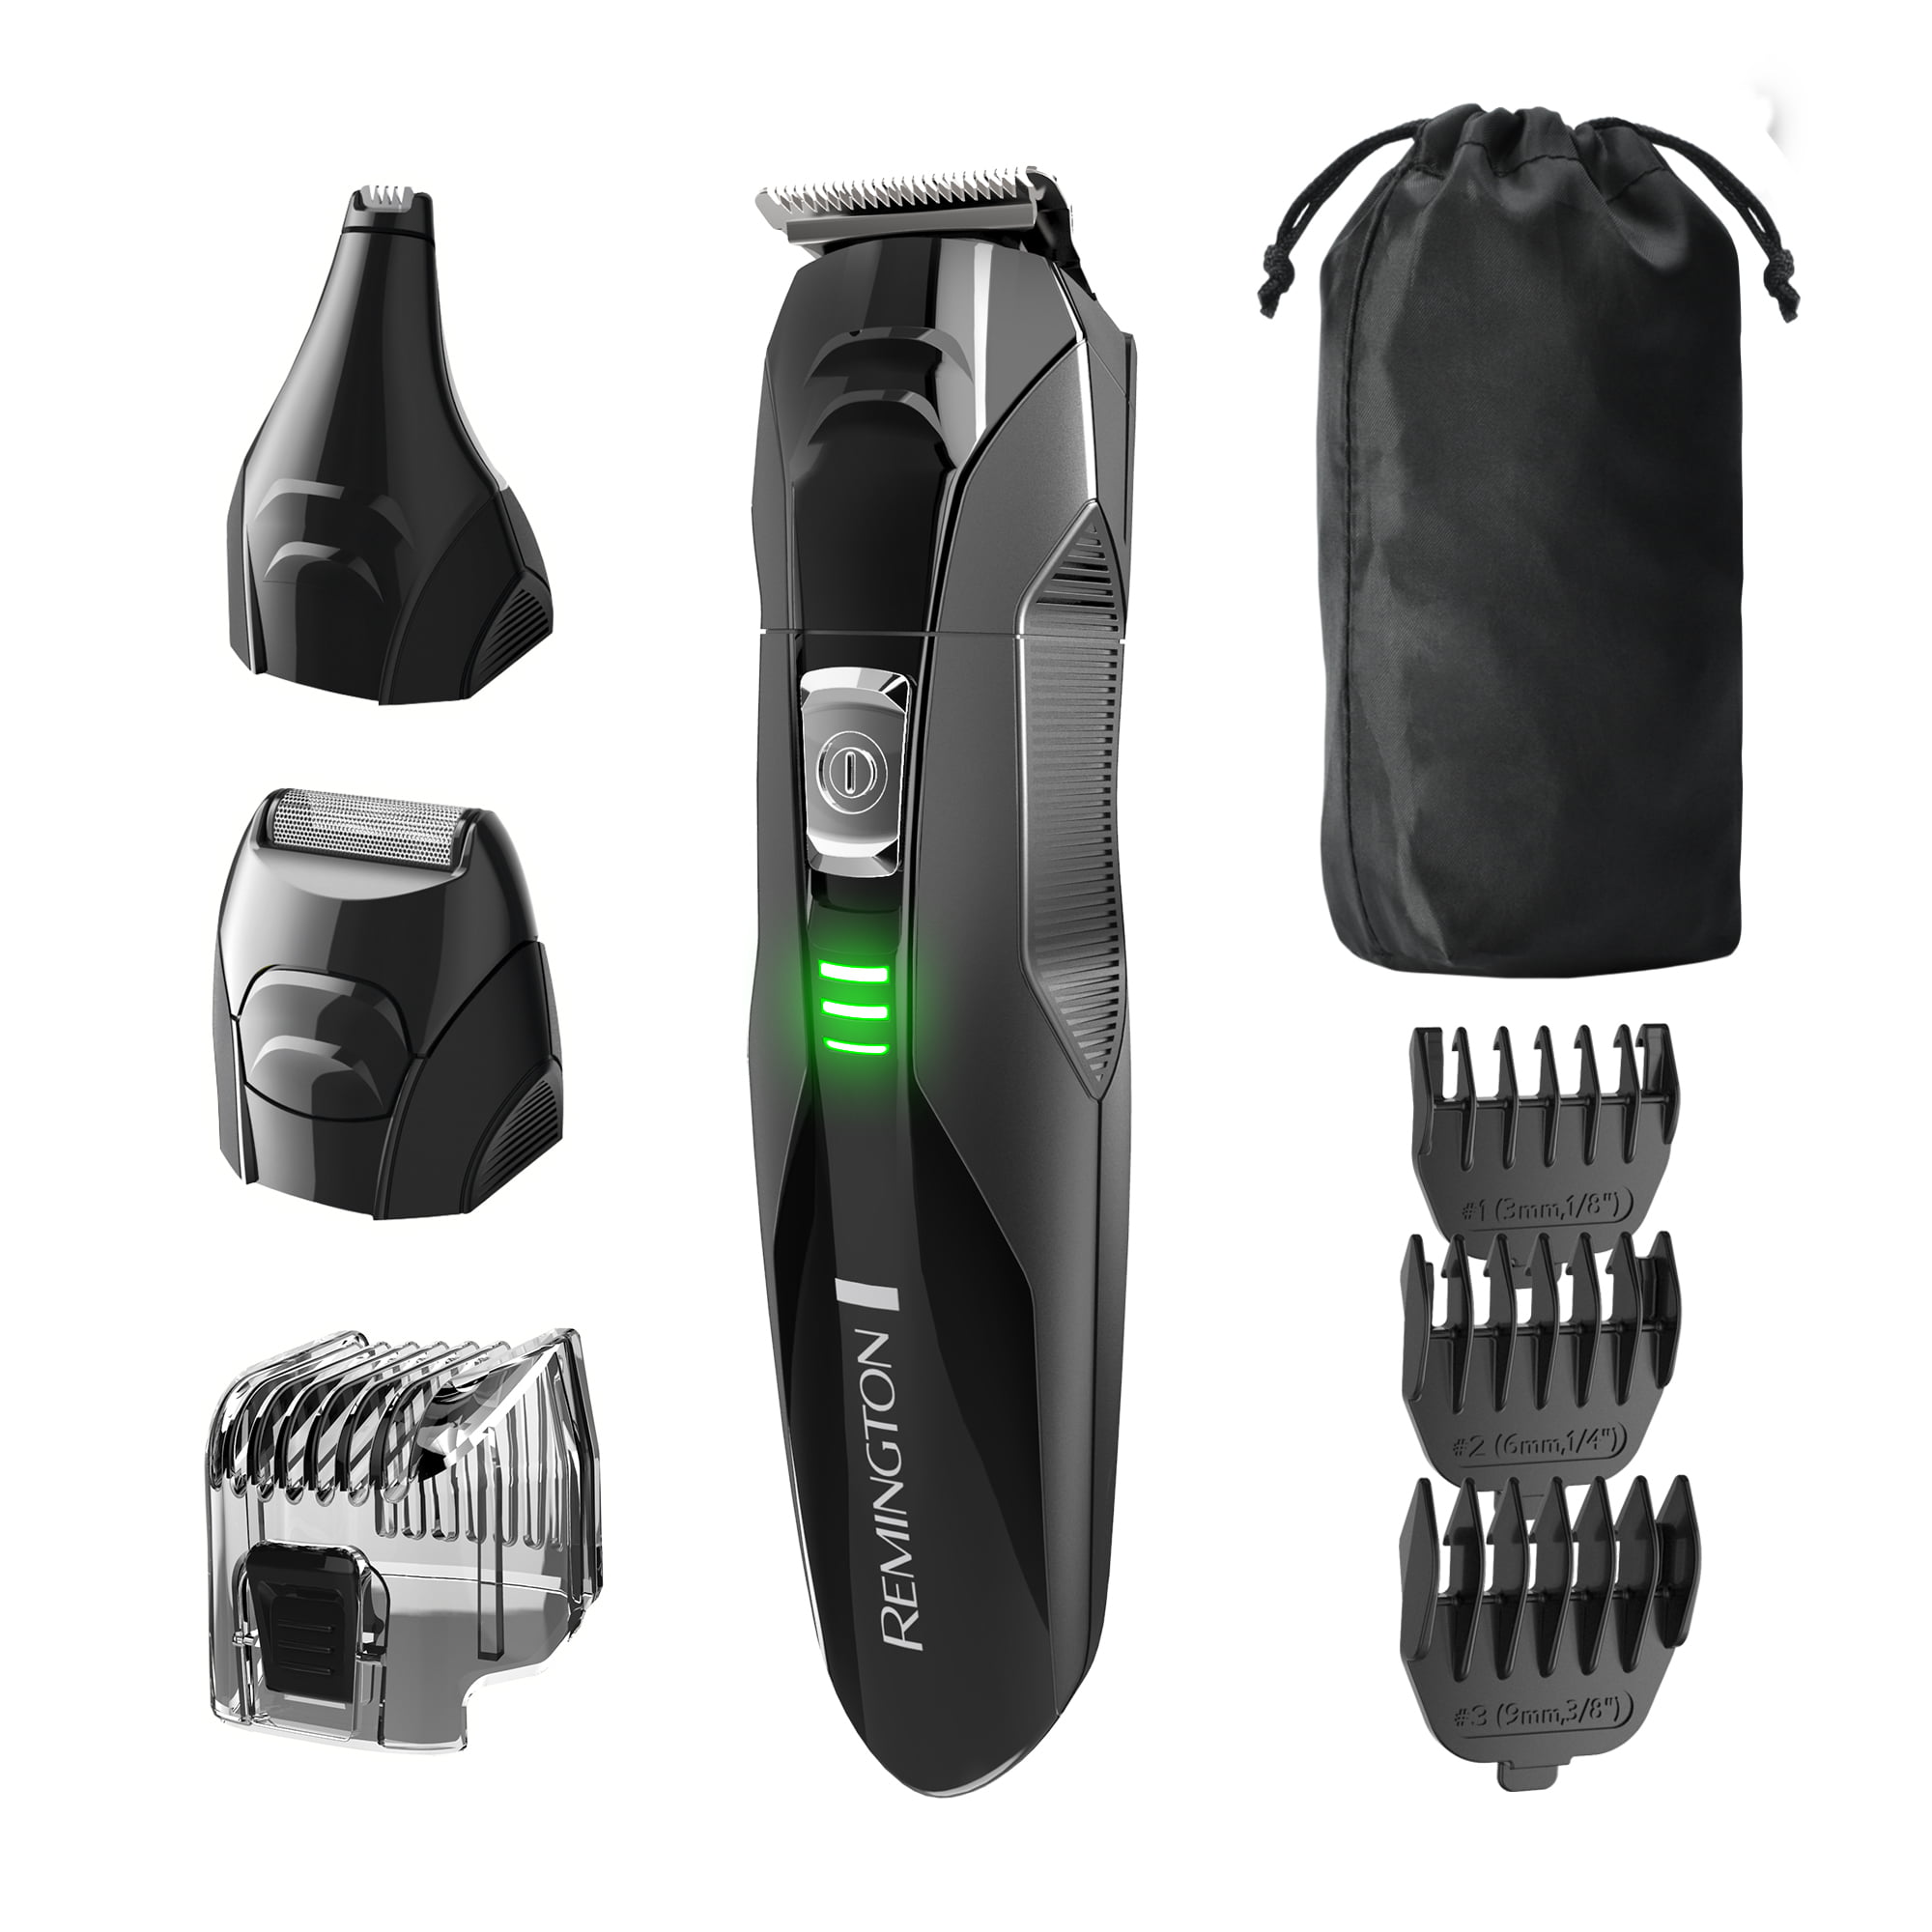 remington 1 all in one grooming kit